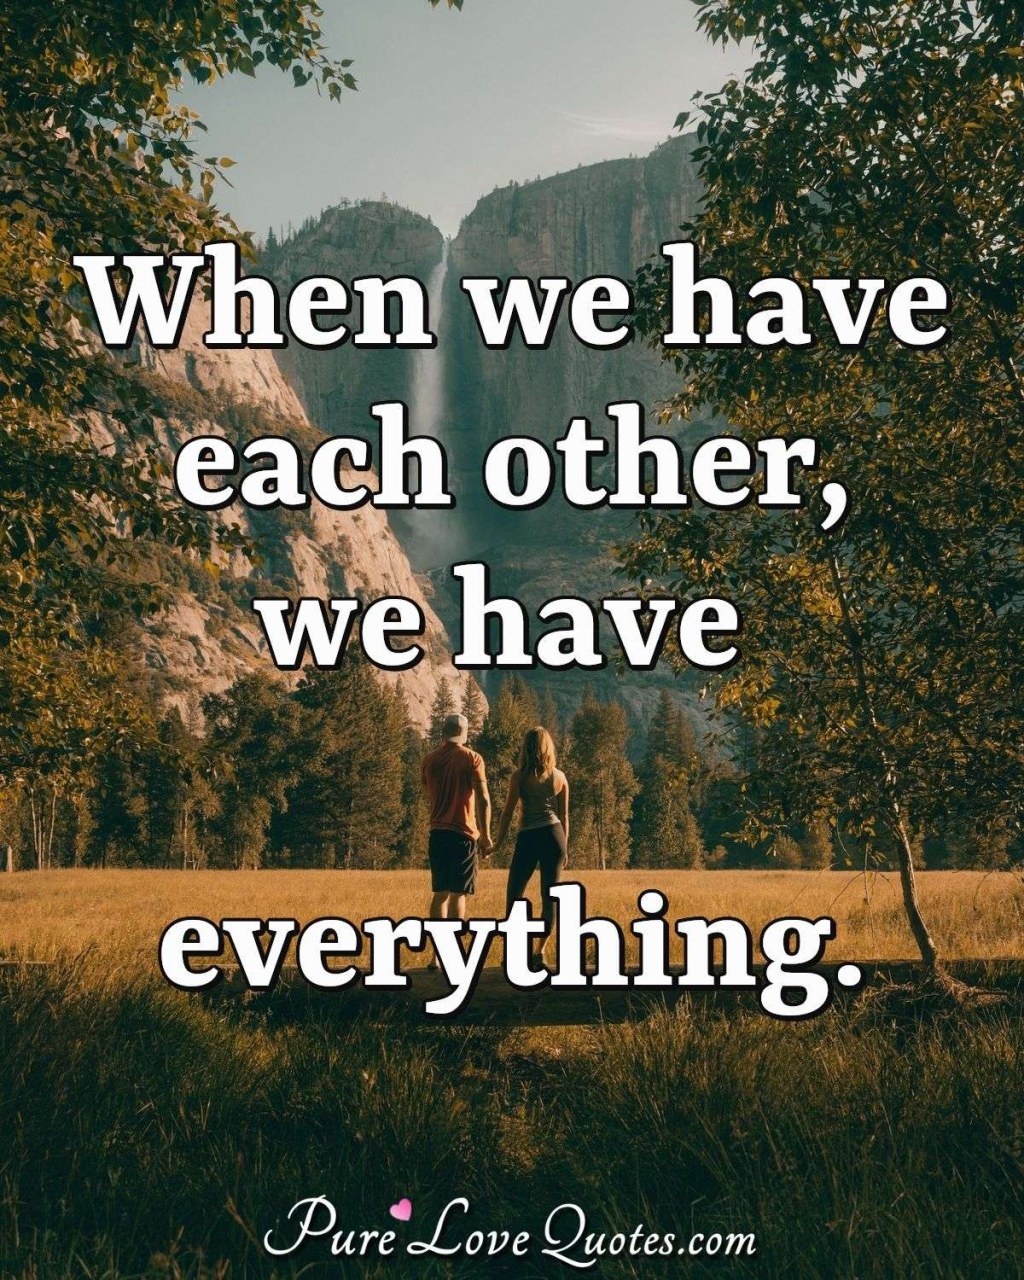 Picture of: When we have each other, we have everything